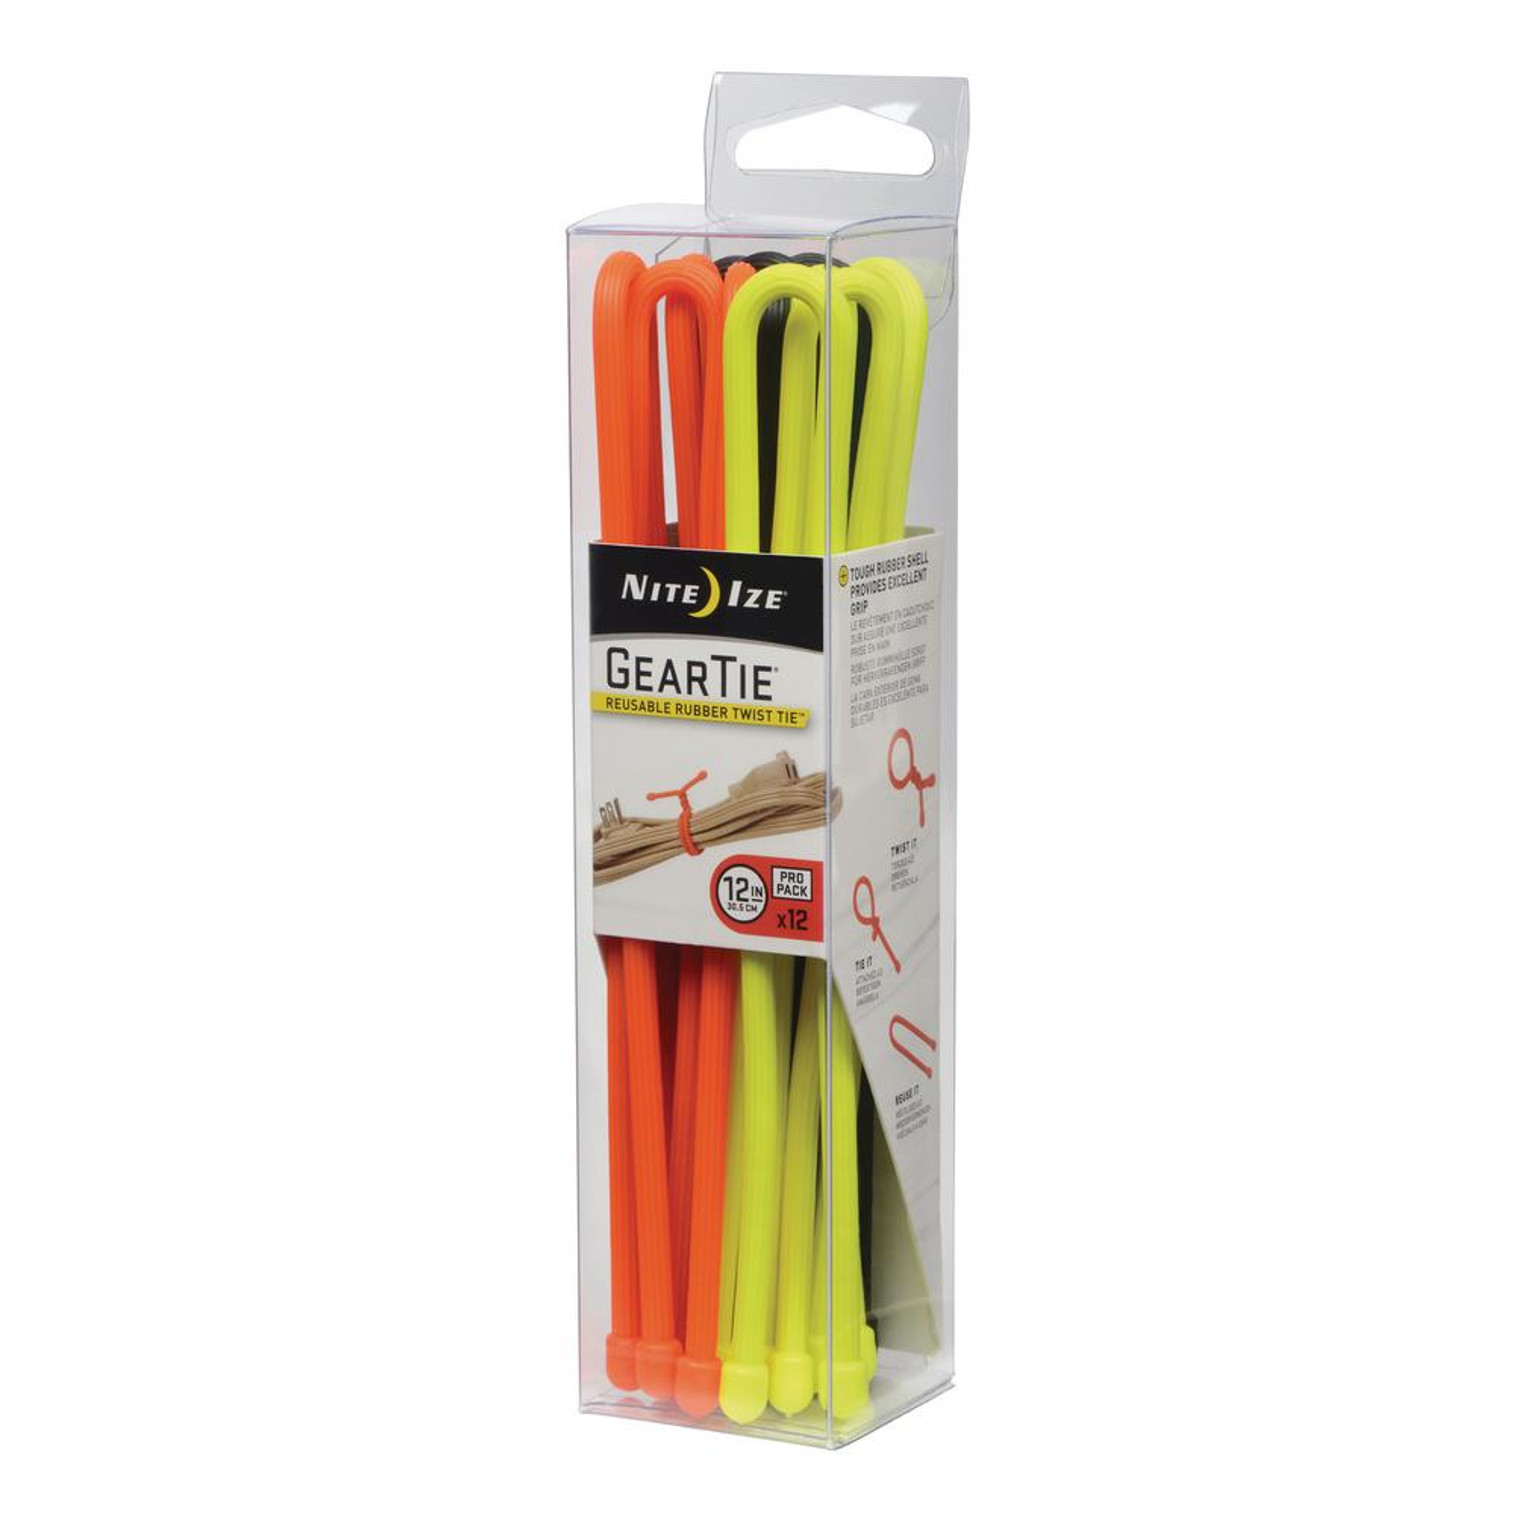 Gear Tie Propack 12 - 12 Pack - Assorted Colors